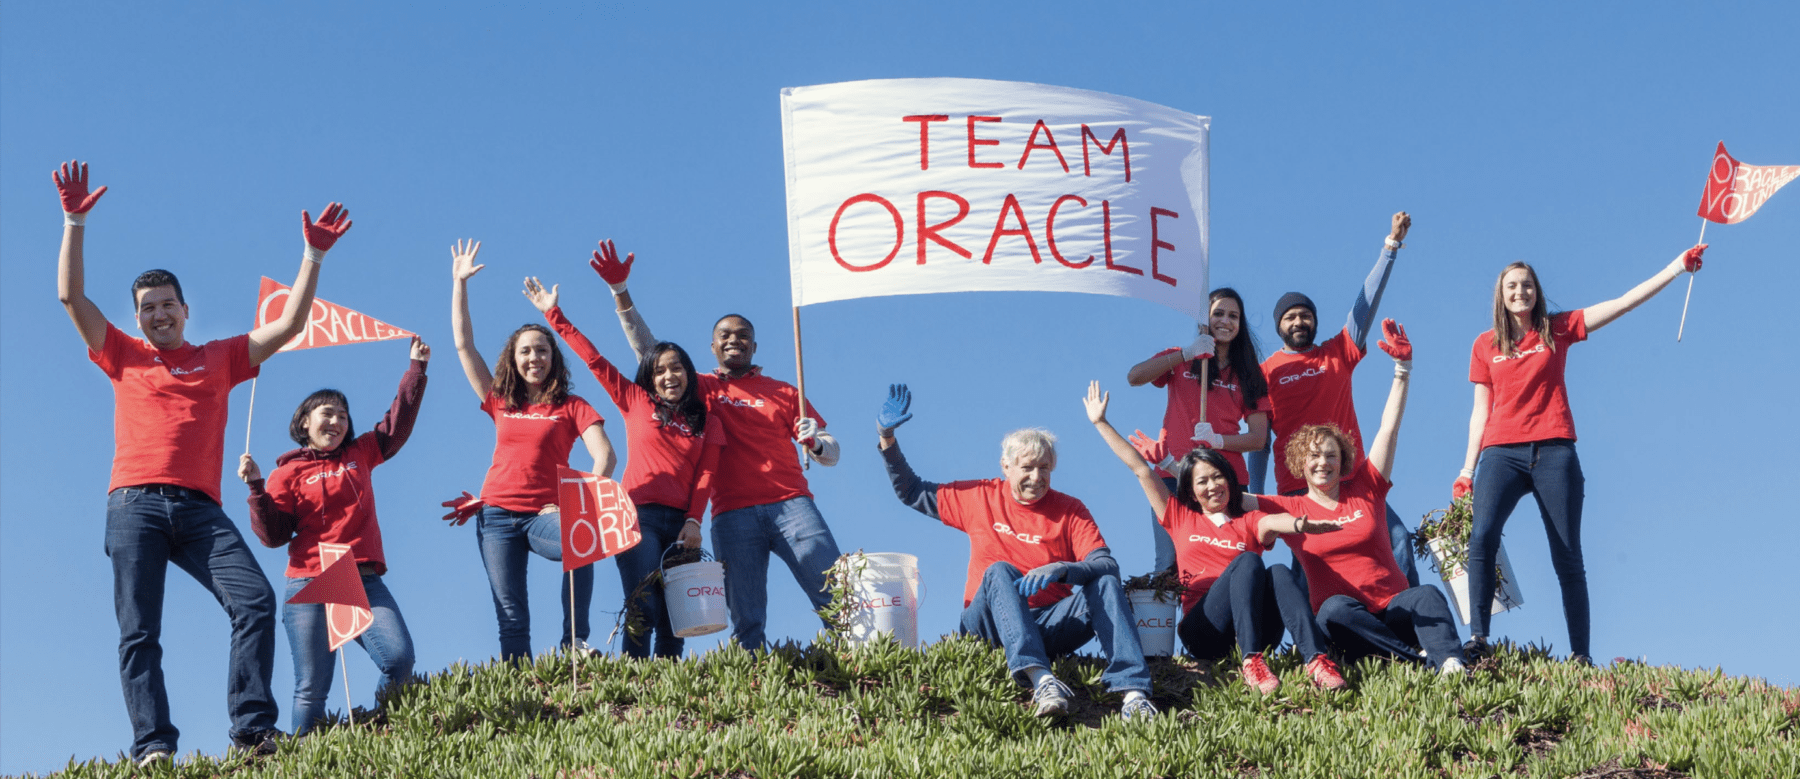 Discover how SaaS and Cloud giants like Oracle build a brand community and amplify their message far and wide. Get the inside strategy for your business.